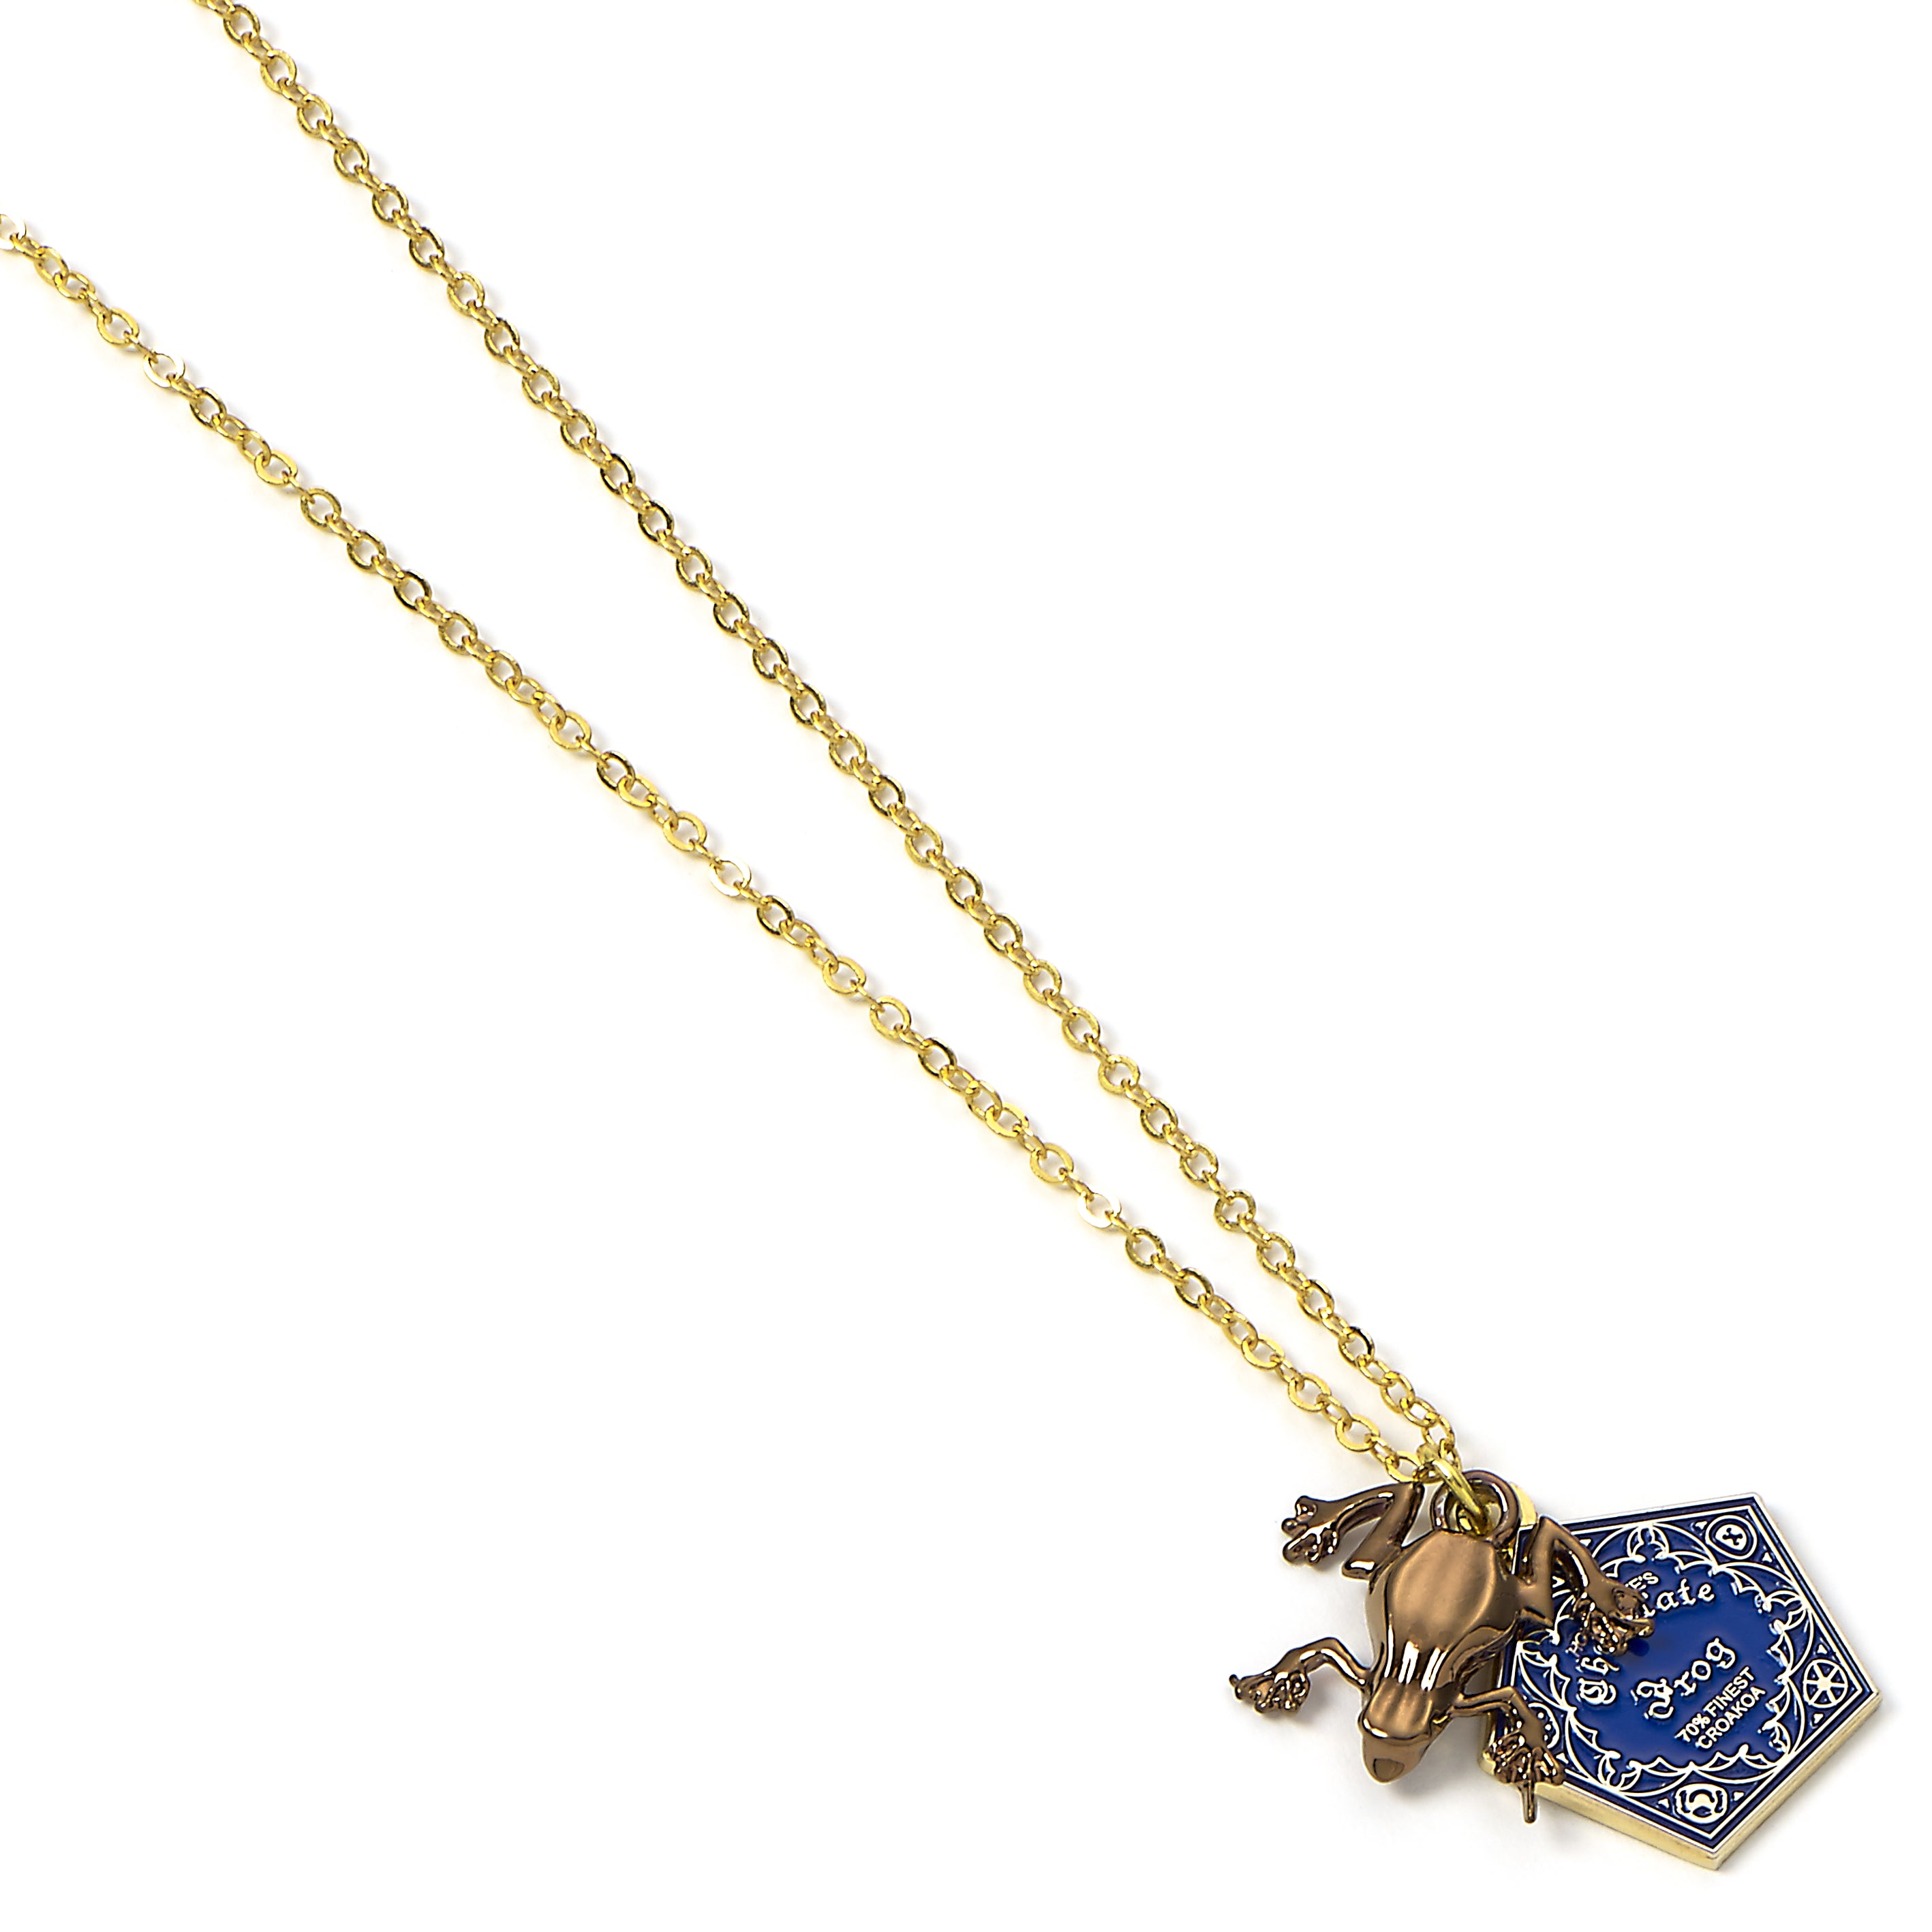 Vintage Florenza Frog Gold Tone Necklace - Jewelry